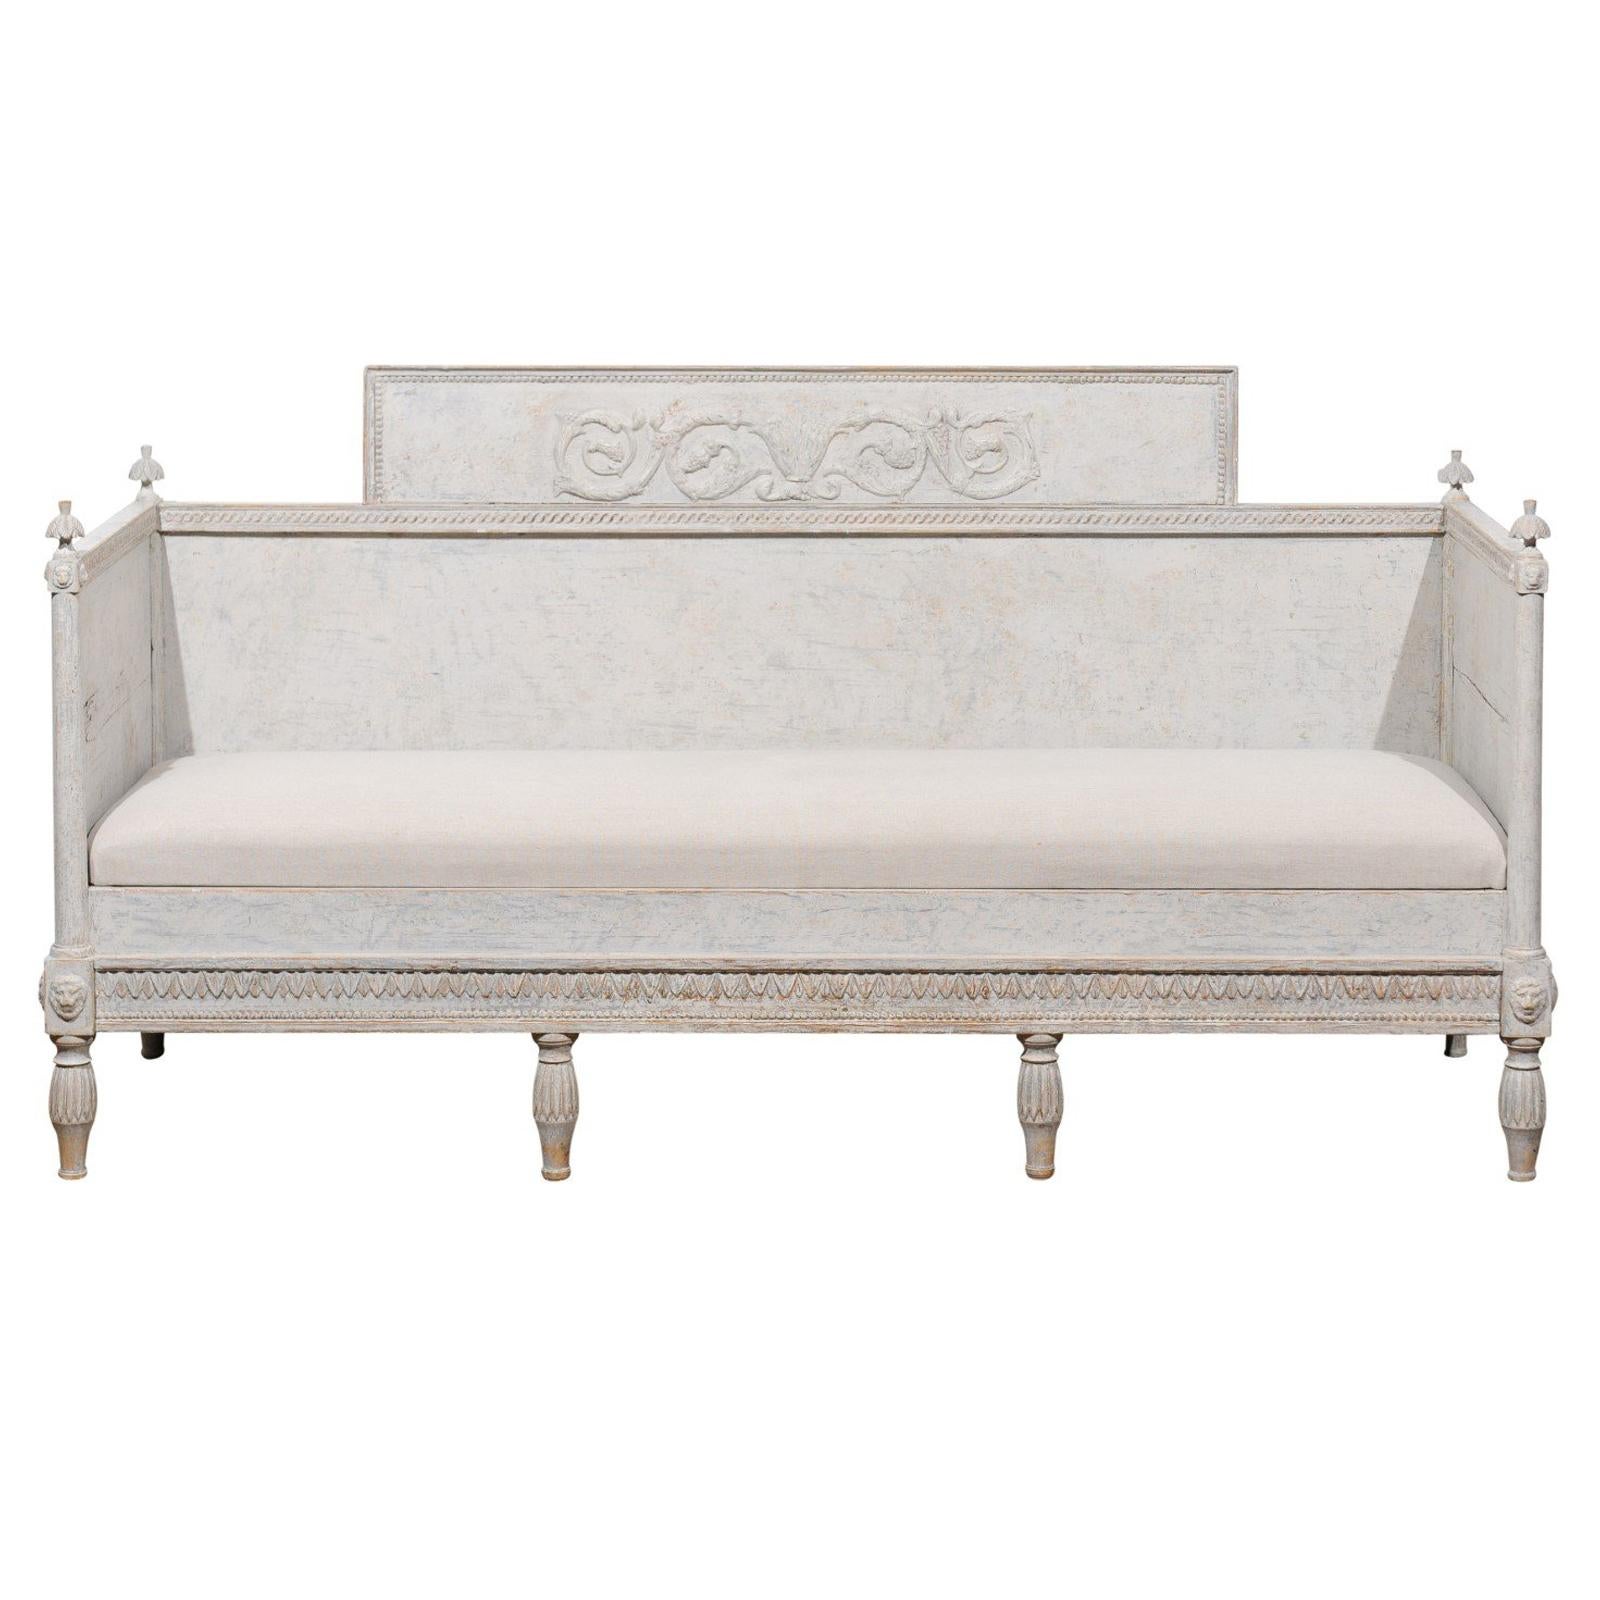 Swedish Neoclassical 1800s Painted Wood Sofa with Scrollwork and Waterleaves